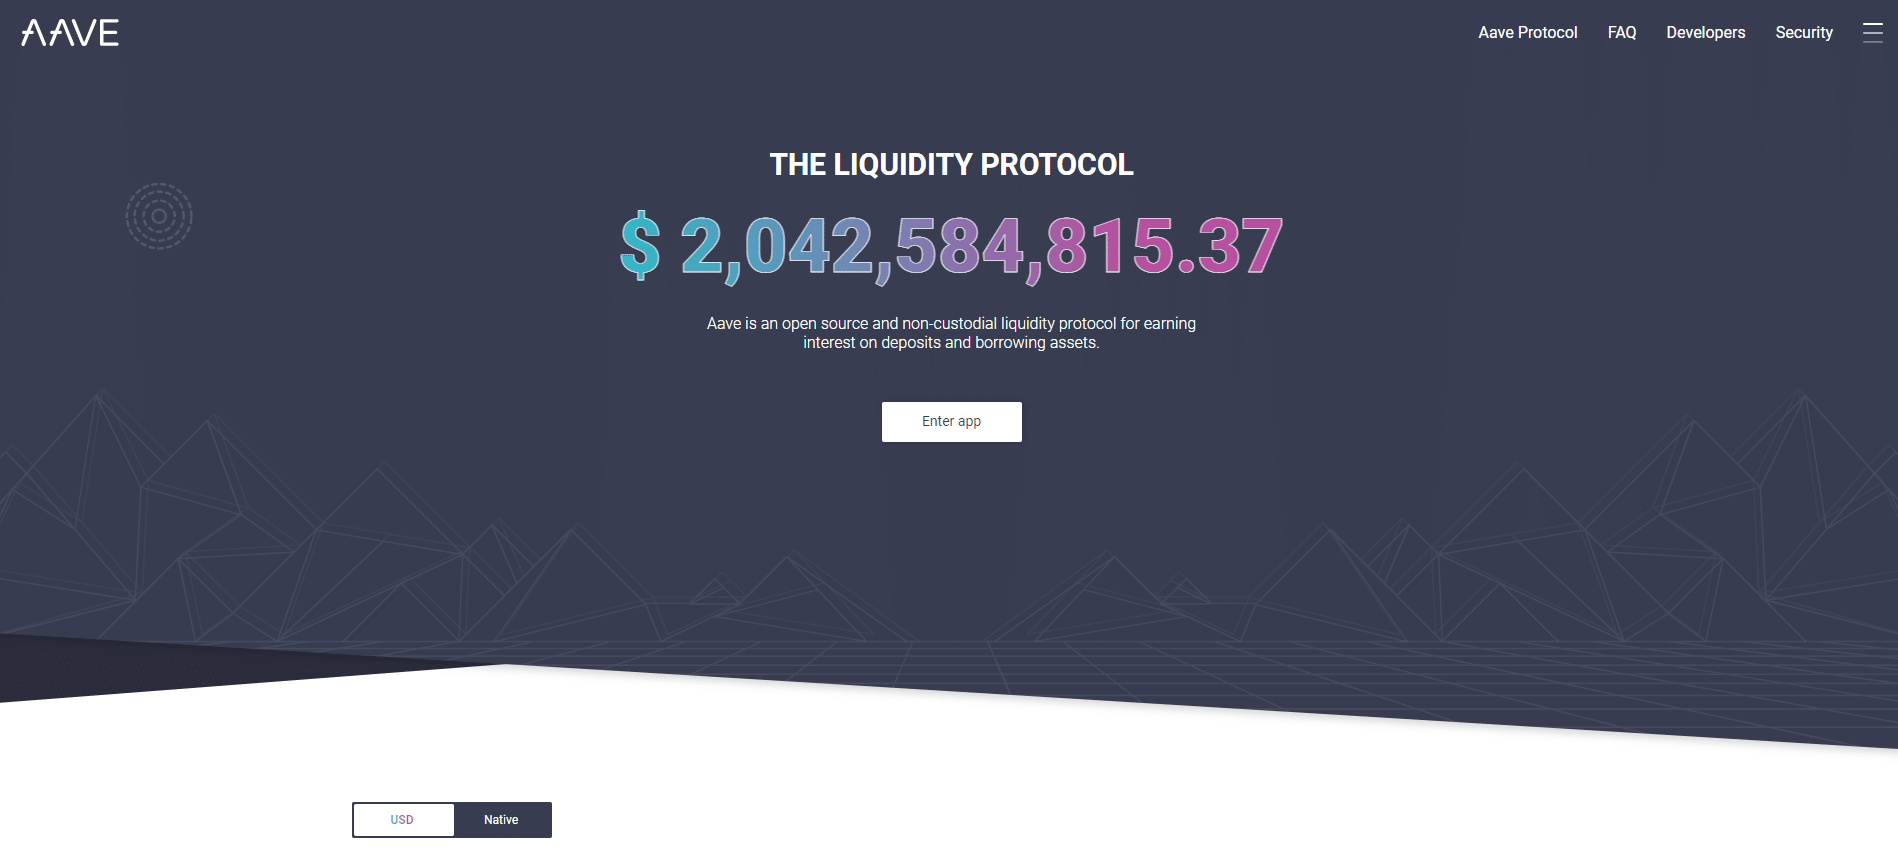 The Liquidity Protocol displays a large number ($2,042,584,815.37 at the time of the screenshot)